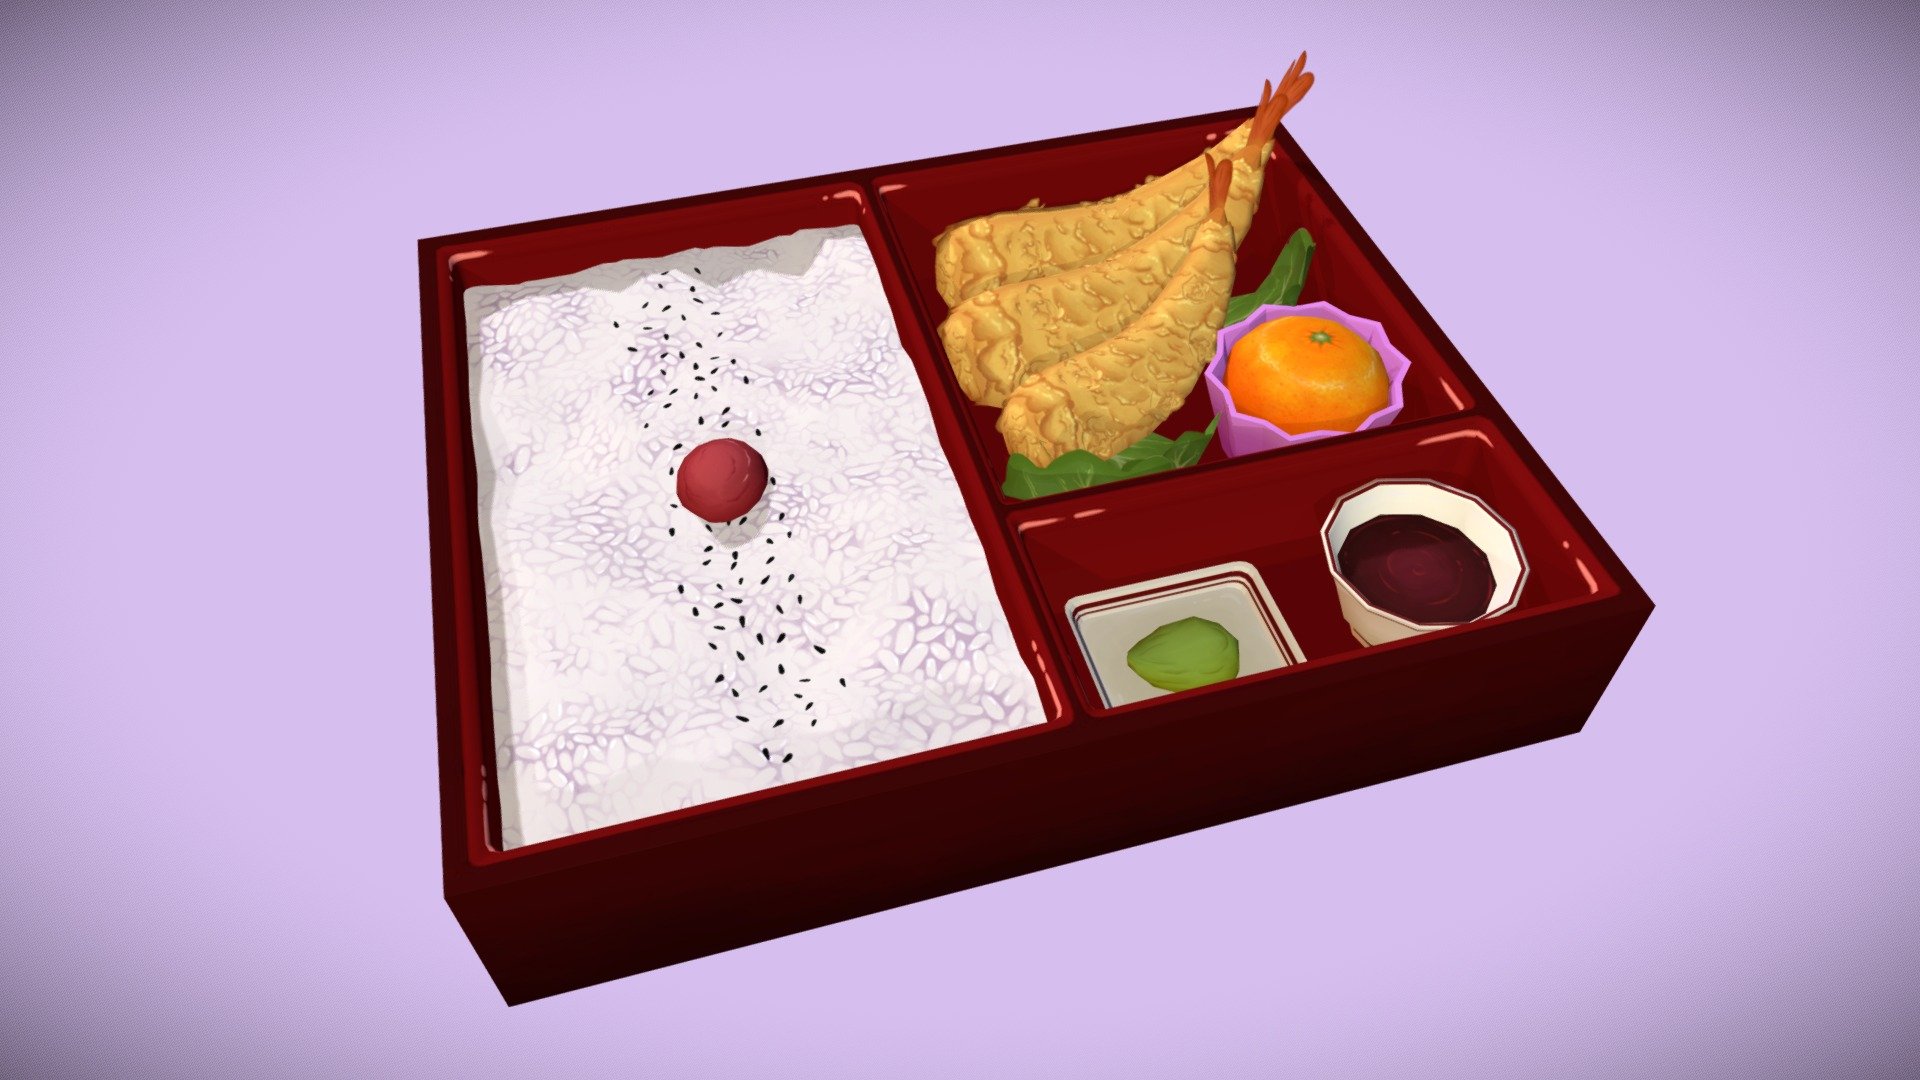 My entry for sketchfab #foodchallenge by @Curlscurly . Also my very first model here on sketchfab! Had a great time making this! - Tempura Bento  #foodchallenge - 3D model by Brenda Najera (@Unikern) 3d model